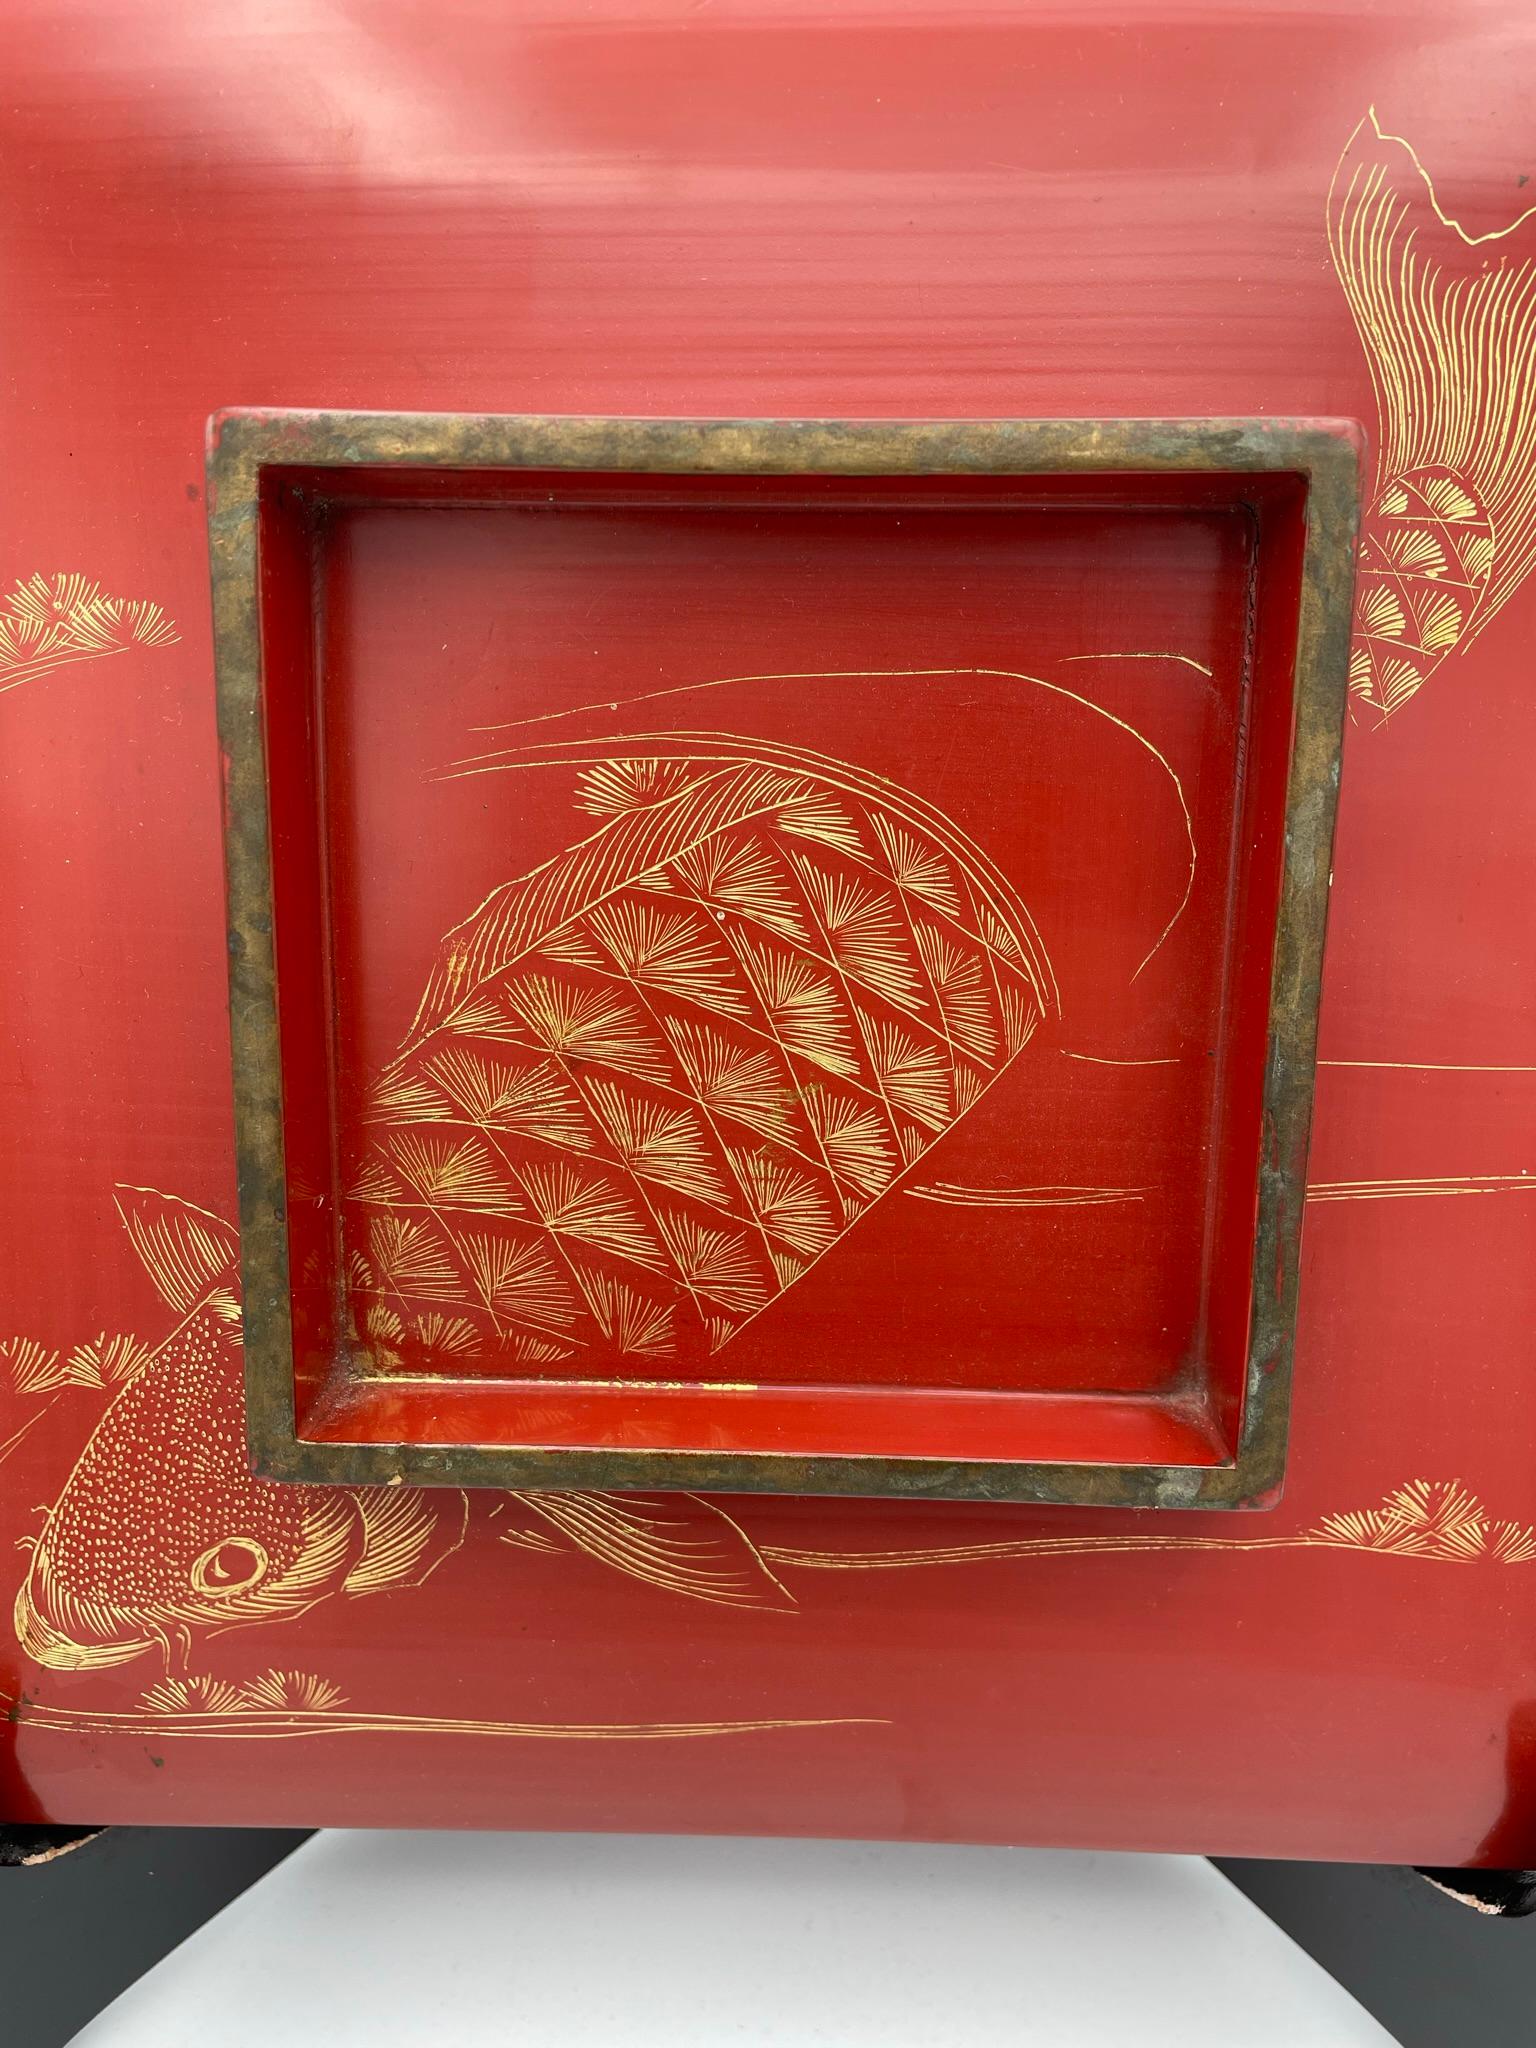 Antique Japanese Lacquer Box with a Koi Fish 1950-1970s 2